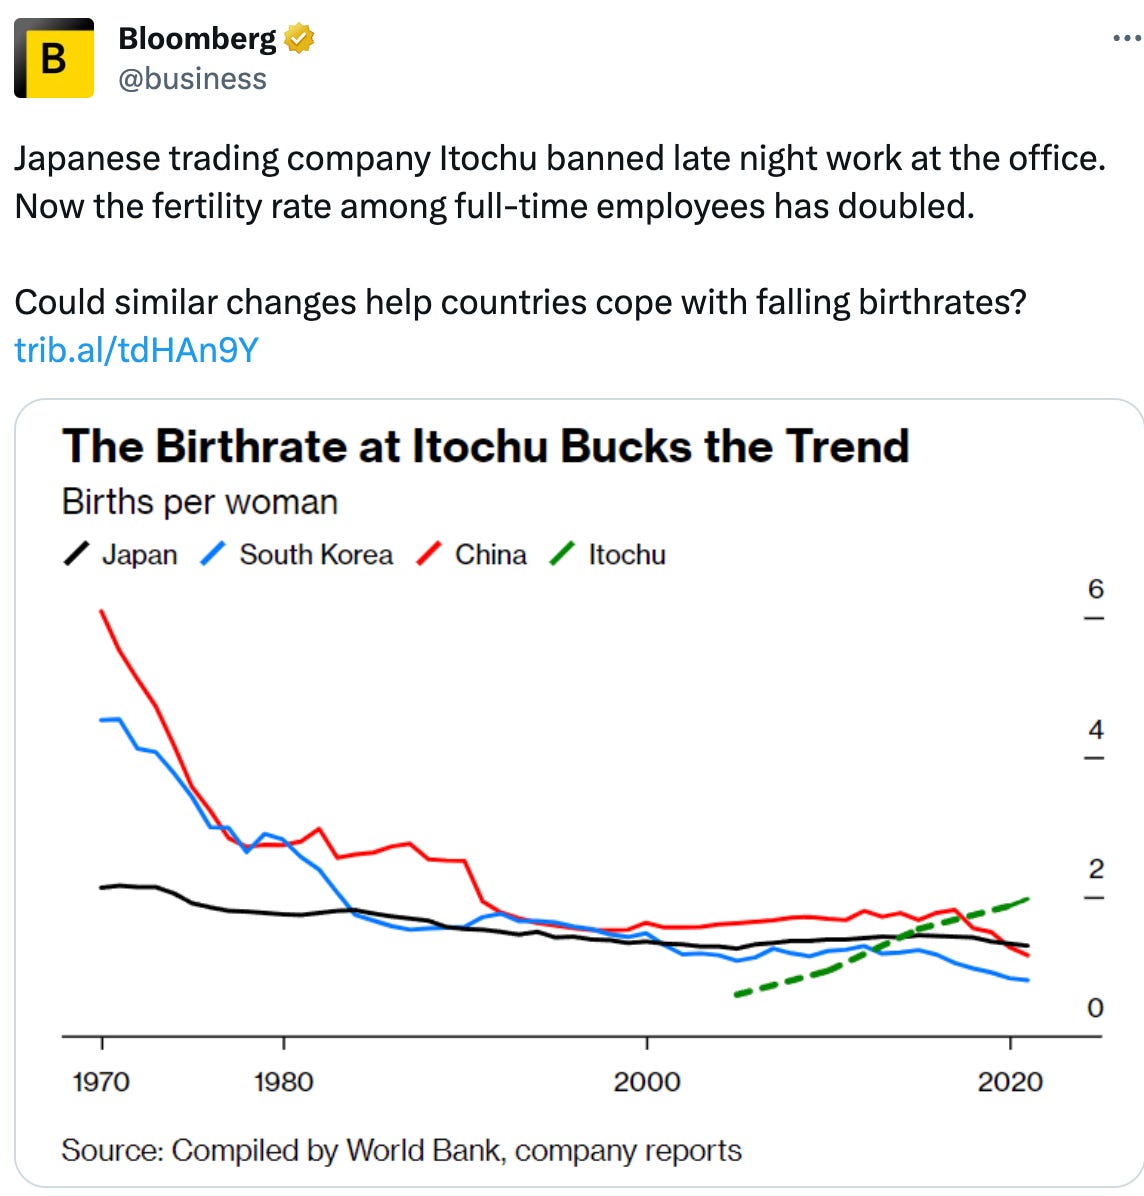  Bloomberg @business Japanese trading company Itochu banned late night work at the office. Now the fertility rate among full-time employees has doubled.  Could similar changes help countries cope with falling birthrates? https://trib.al/tdHAn9Y